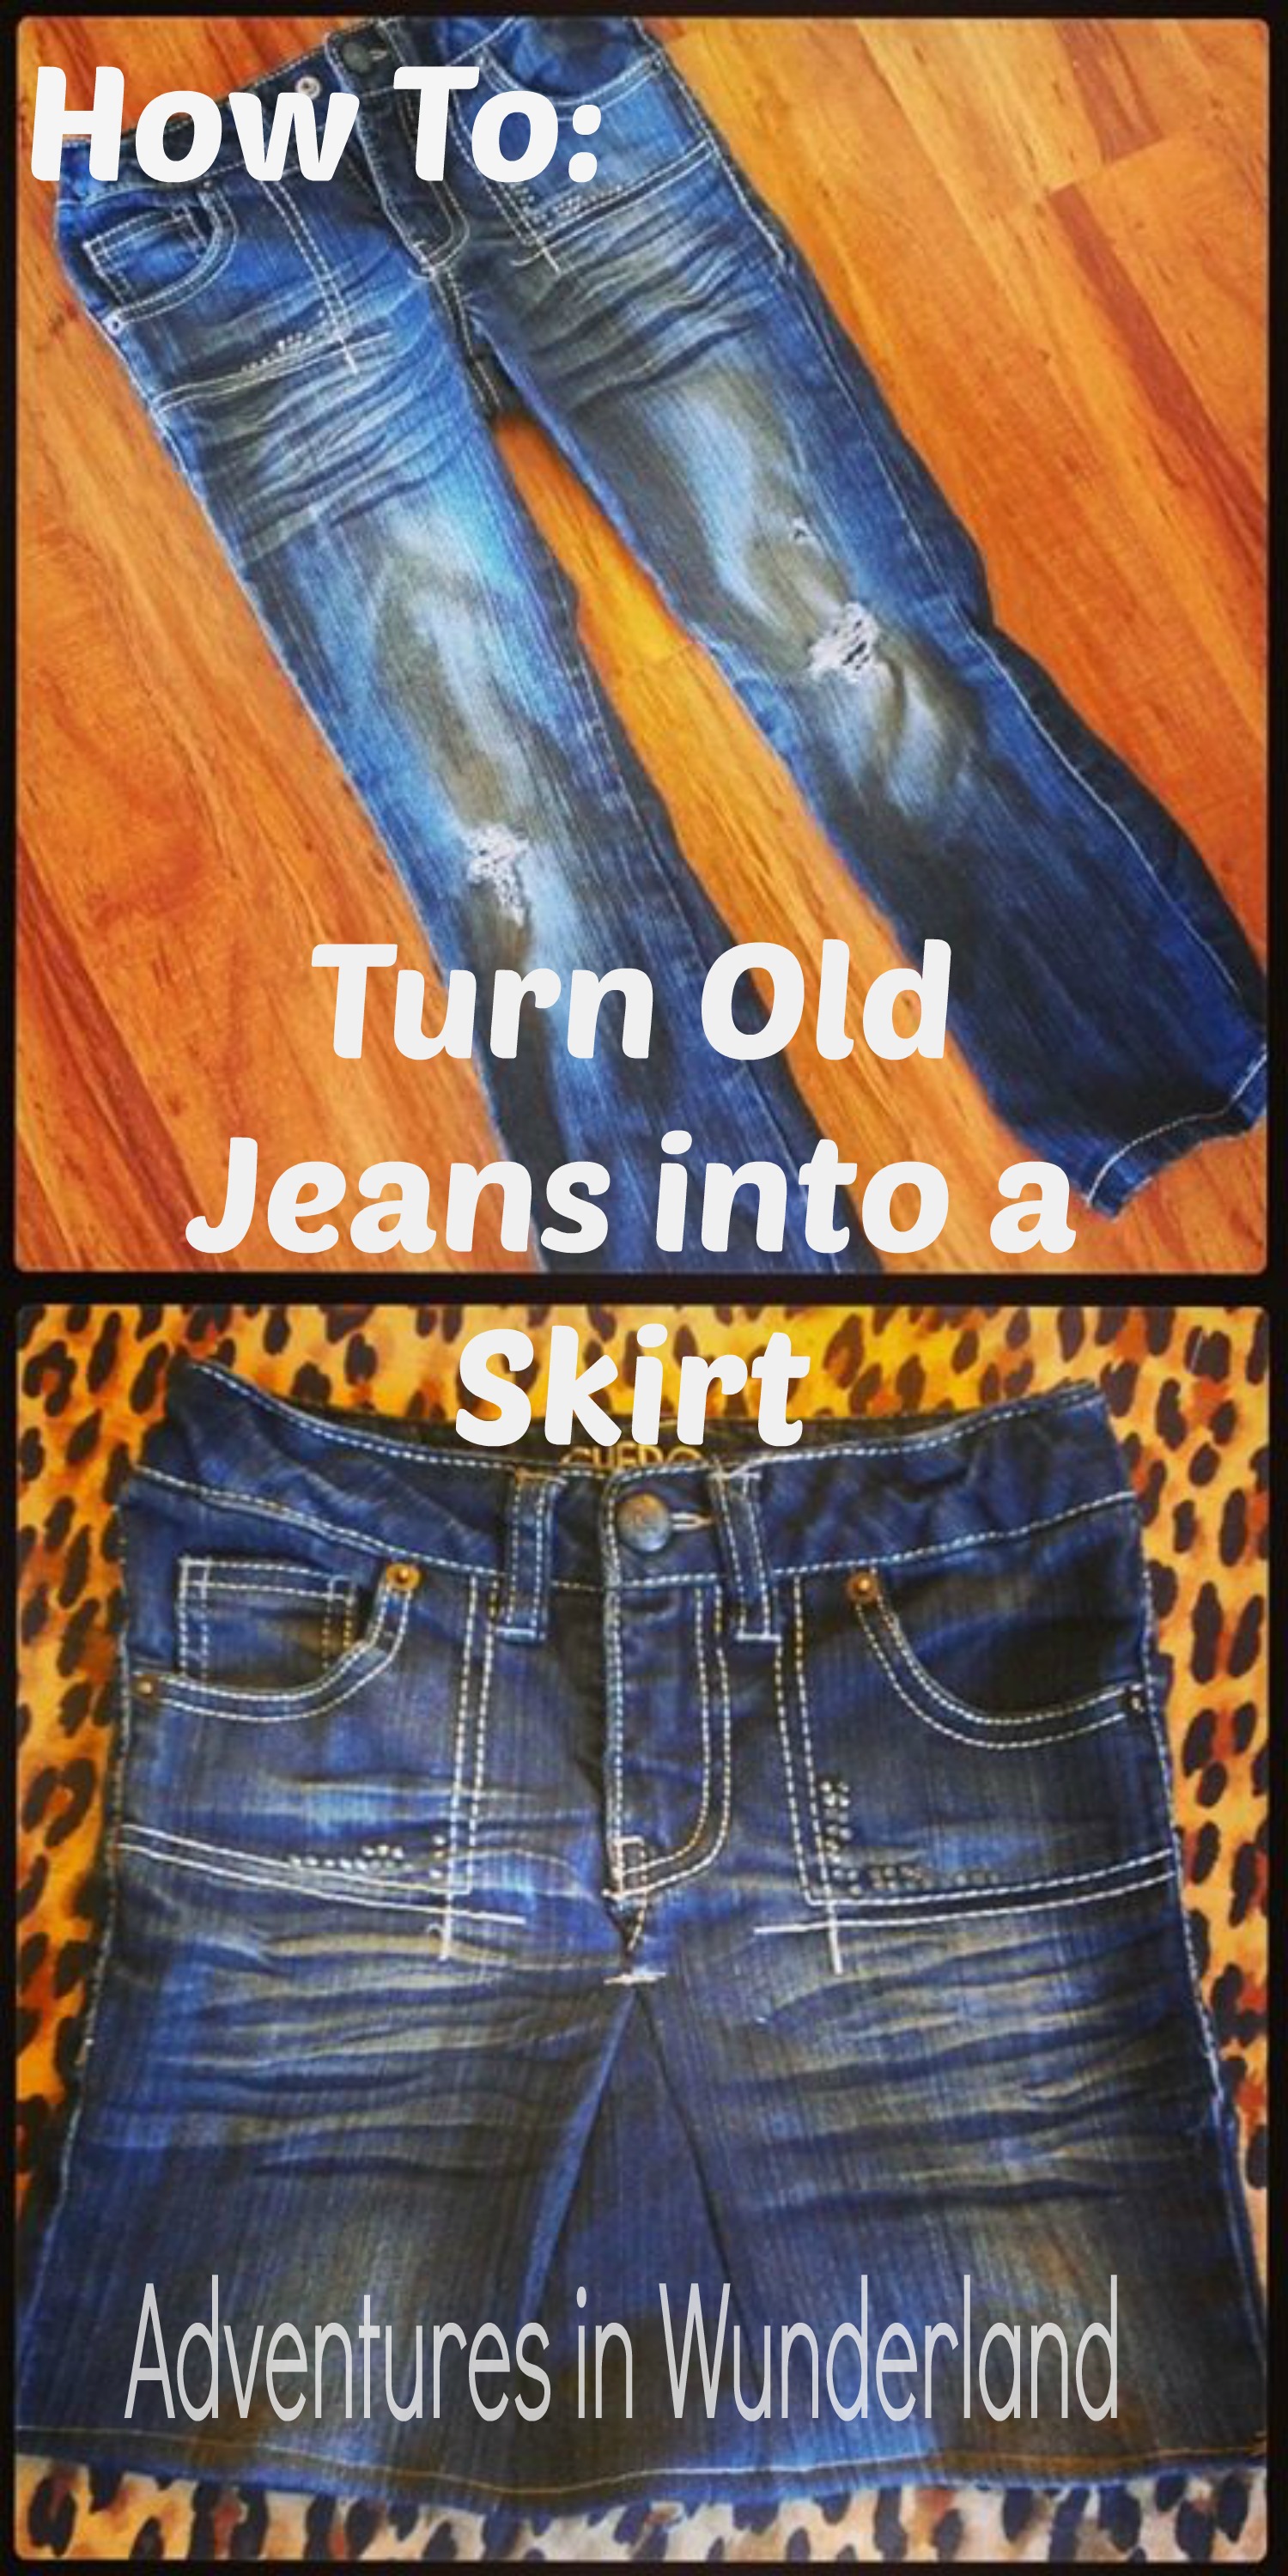 How to Turn Old Jeans into a Skirt